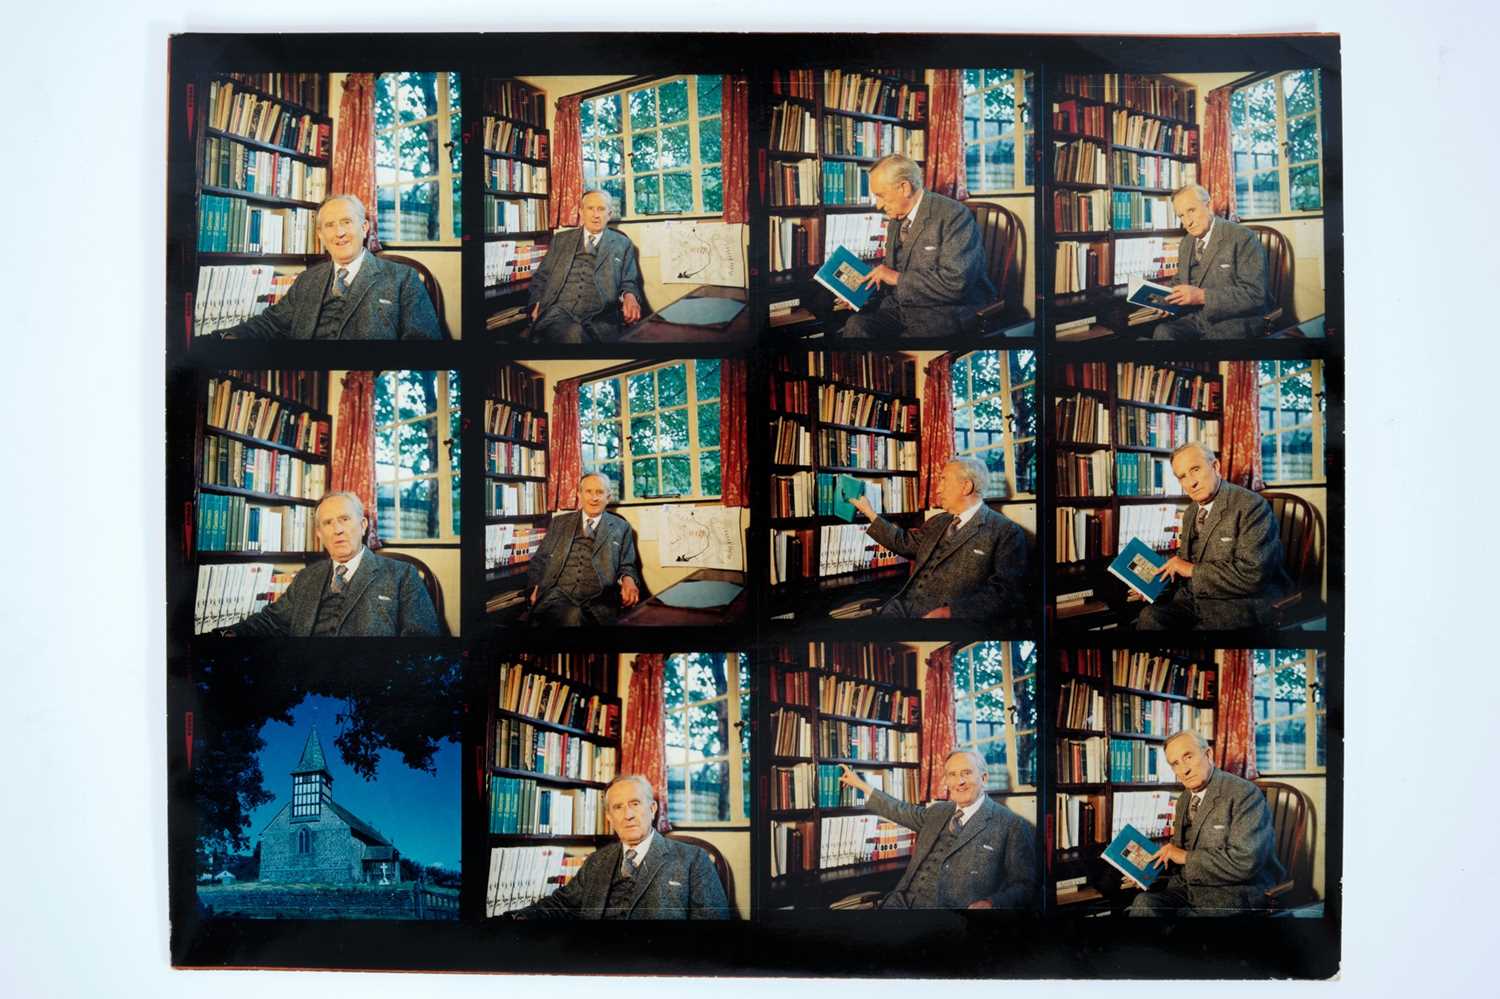 Lot 1472 - Pamela Chandler (1928-1993) four colour contact sheets taken of J. R, R. Tolkien and his wife Edith ,together with a black and white contact sheet from the same photographic session